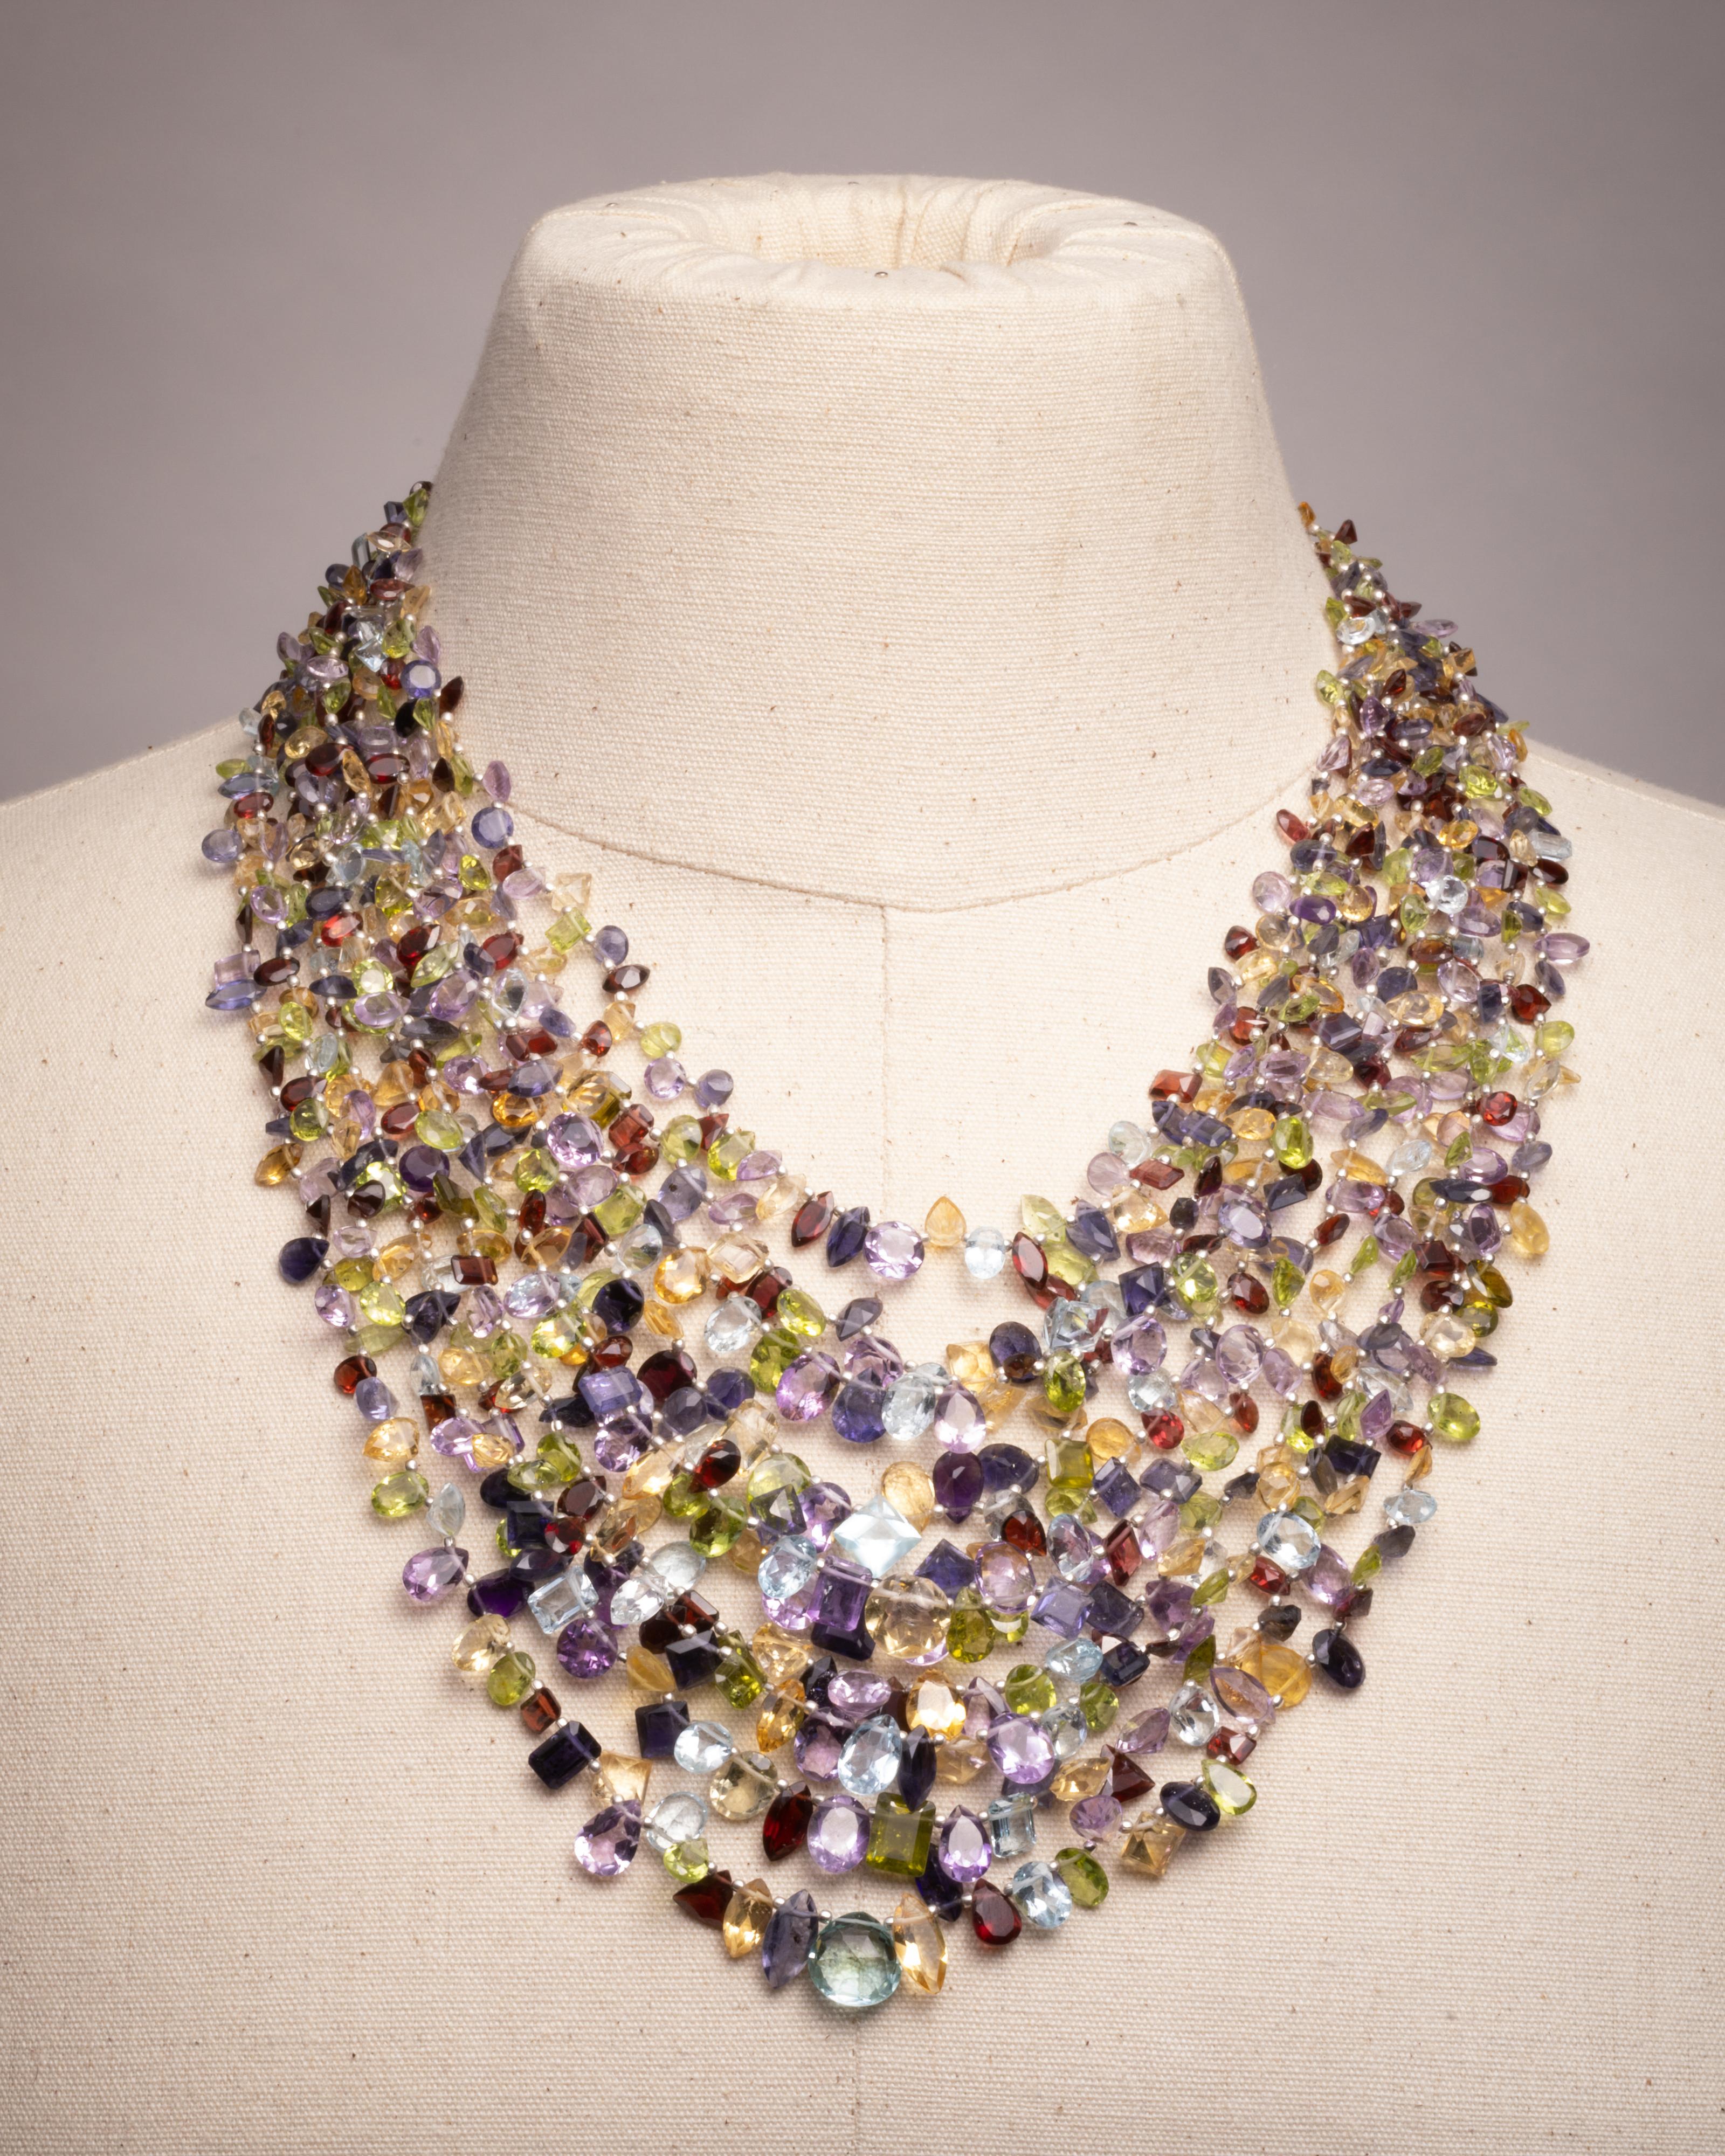 A 10-line multi-strand necklace comprised of faceted semi-precious stones.  Aquamarine, peridot, garnet, citrine, amethyst and kyantie.  Each stone is a different shape--square cut, round, marquise, oval and pear shapes.  Interesting loop clasp also